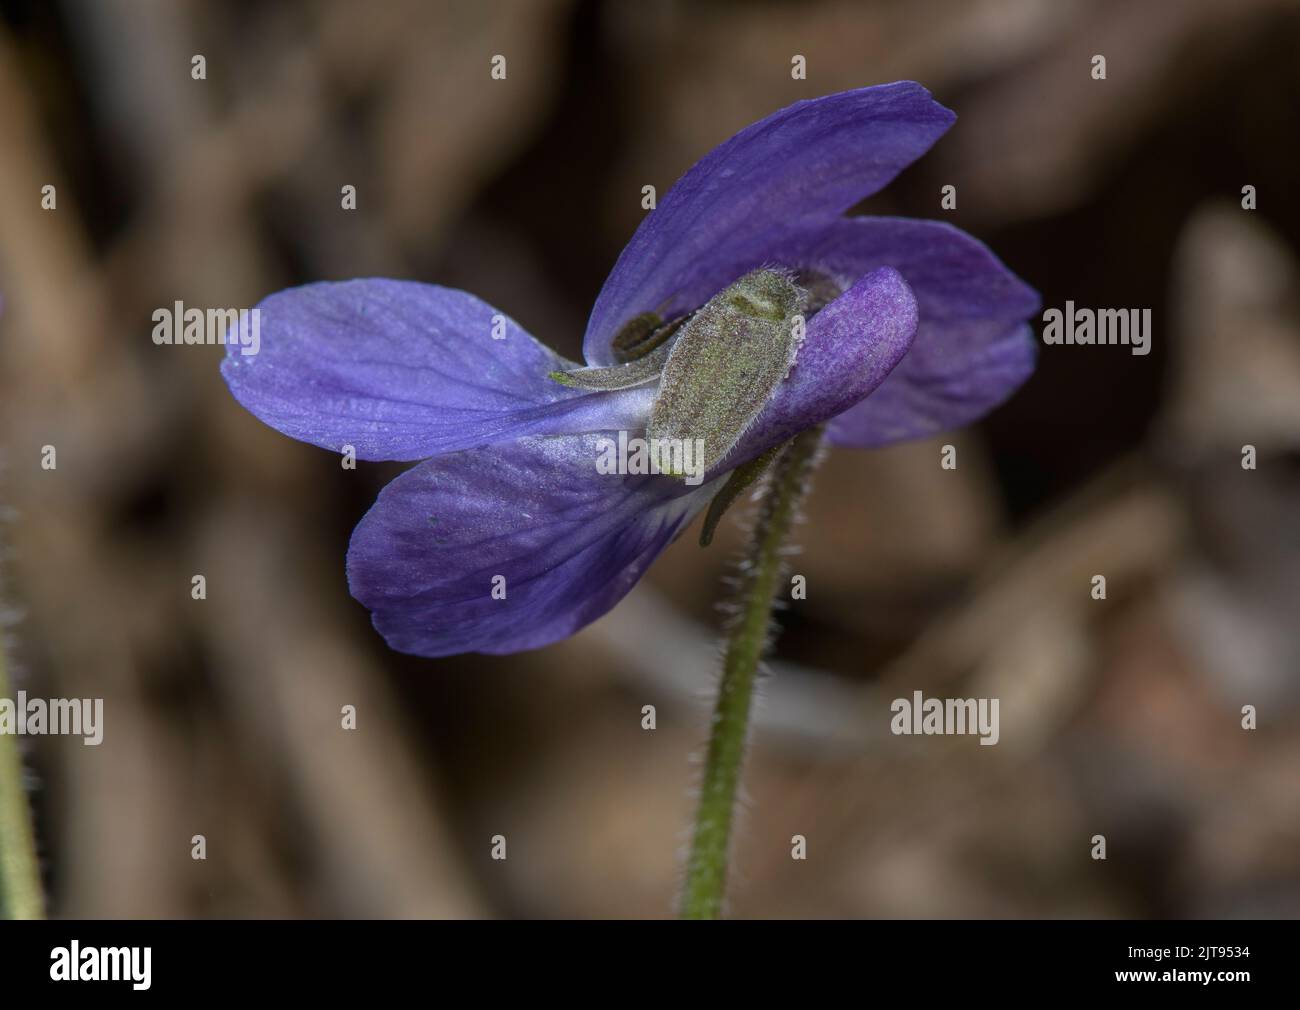 Hairy Violet, Viola hirta in flower, showing blunt sepals, in early spring. Stock Photo